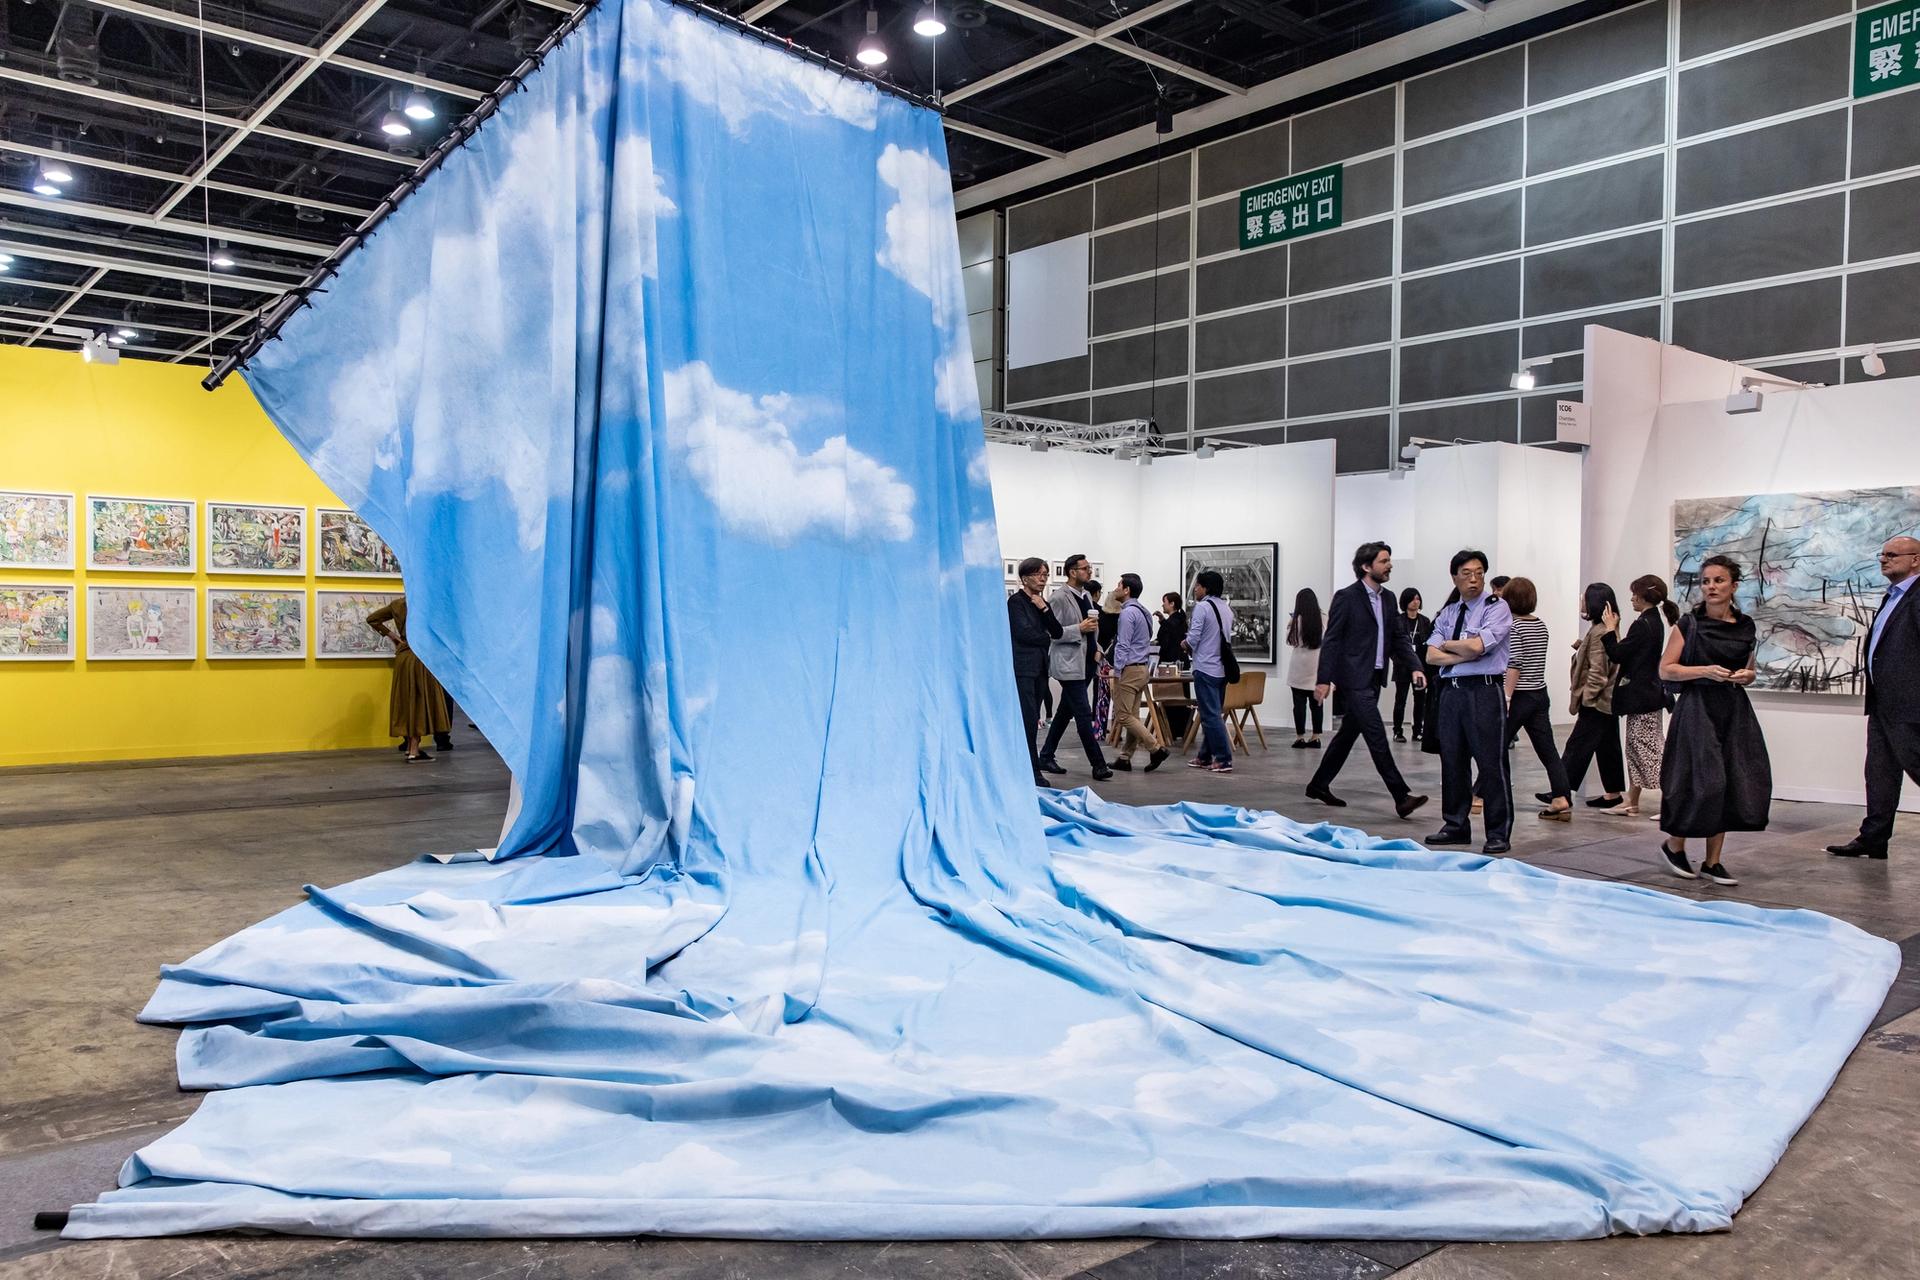 Latifa Echakhch's La dépossession (2014) on show at this year's Art Basel in Hong Kong © Art Basel